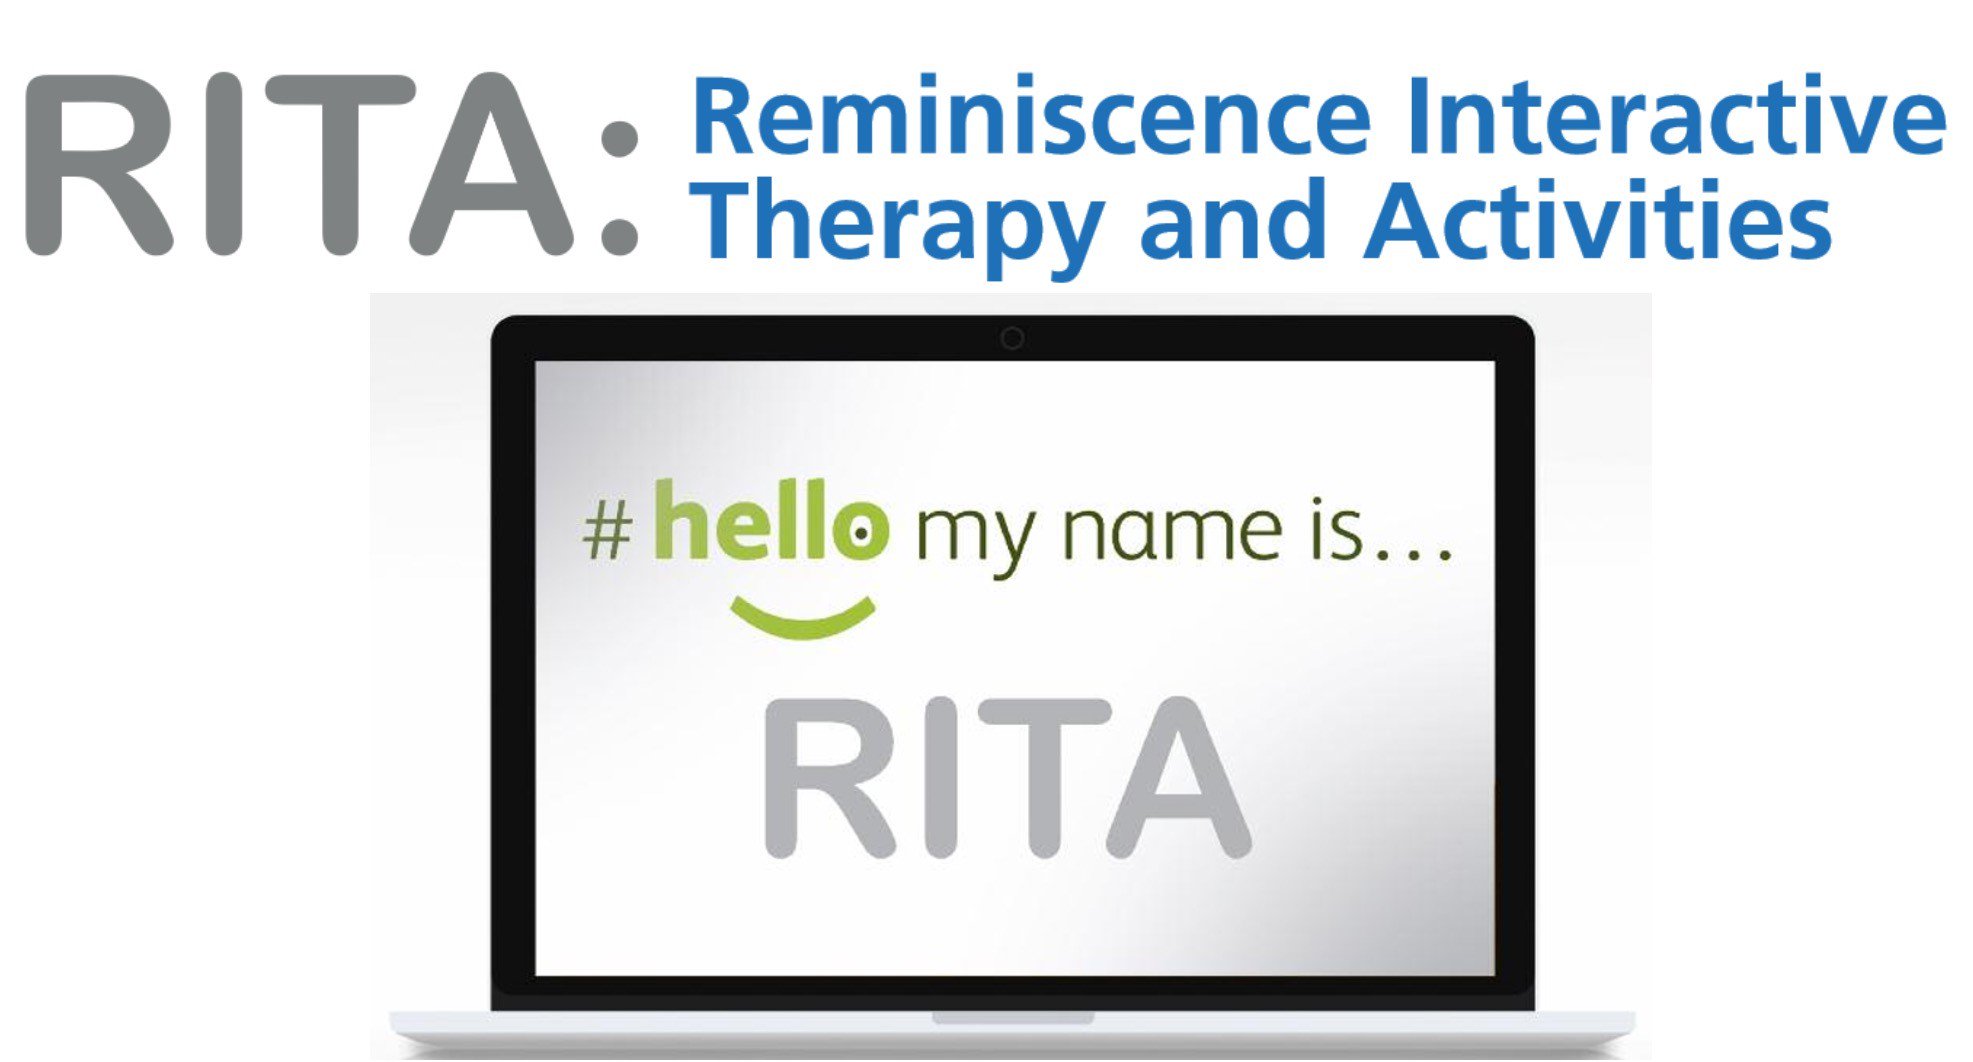 Hello My Name Is RITA featured image